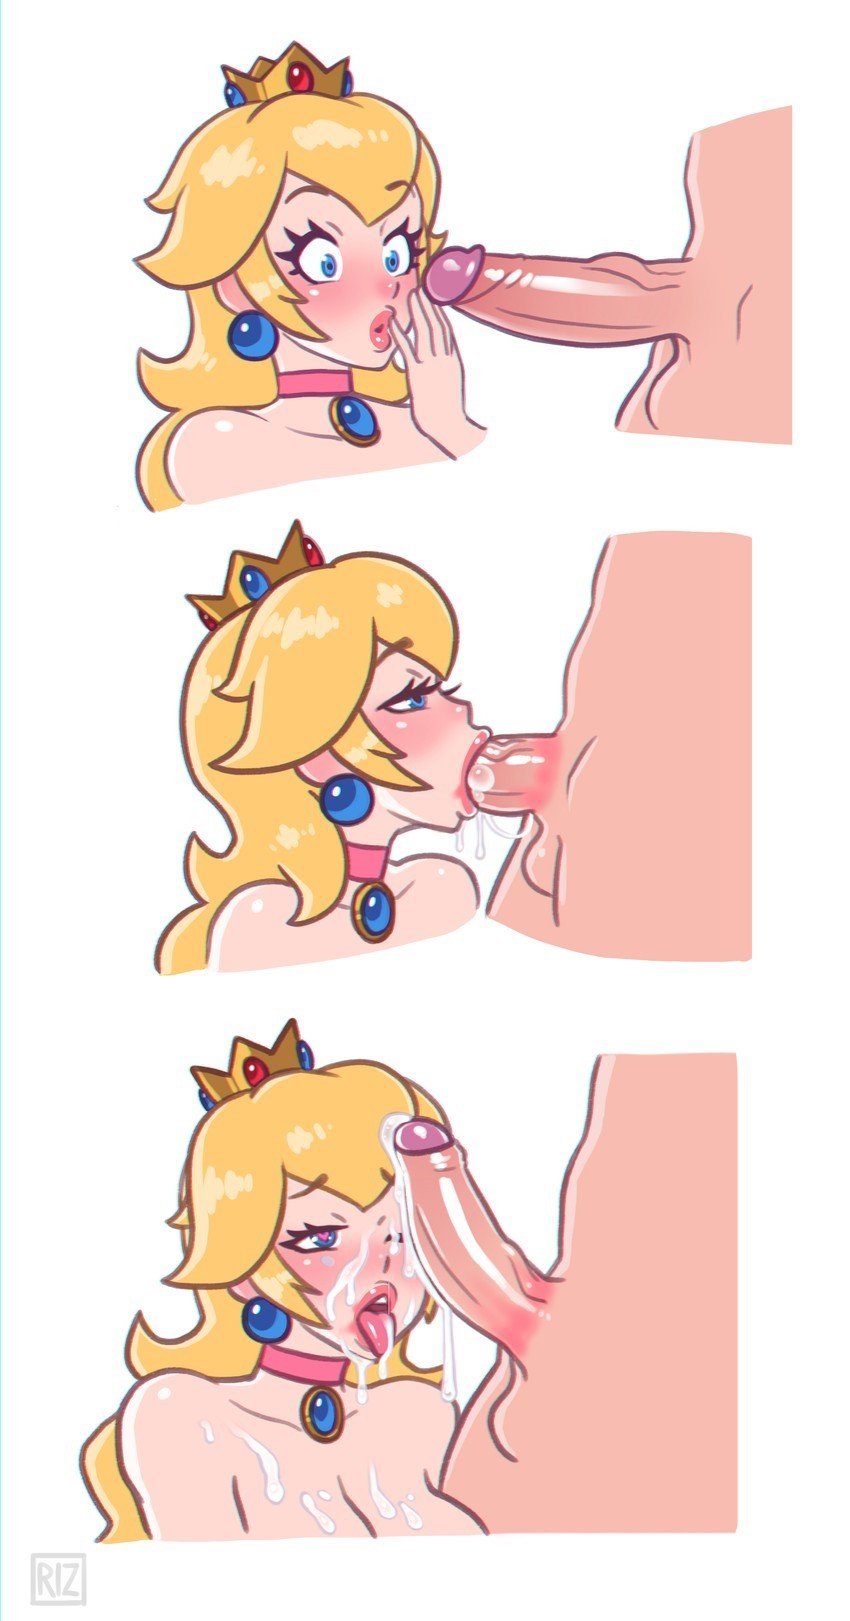 Photo by L337master with the username @L337master,  March 9, 2020 at 7:25 AM. The post is about the topic Hentai and the text says '#princesspeach #peach #hentai #blowjob'